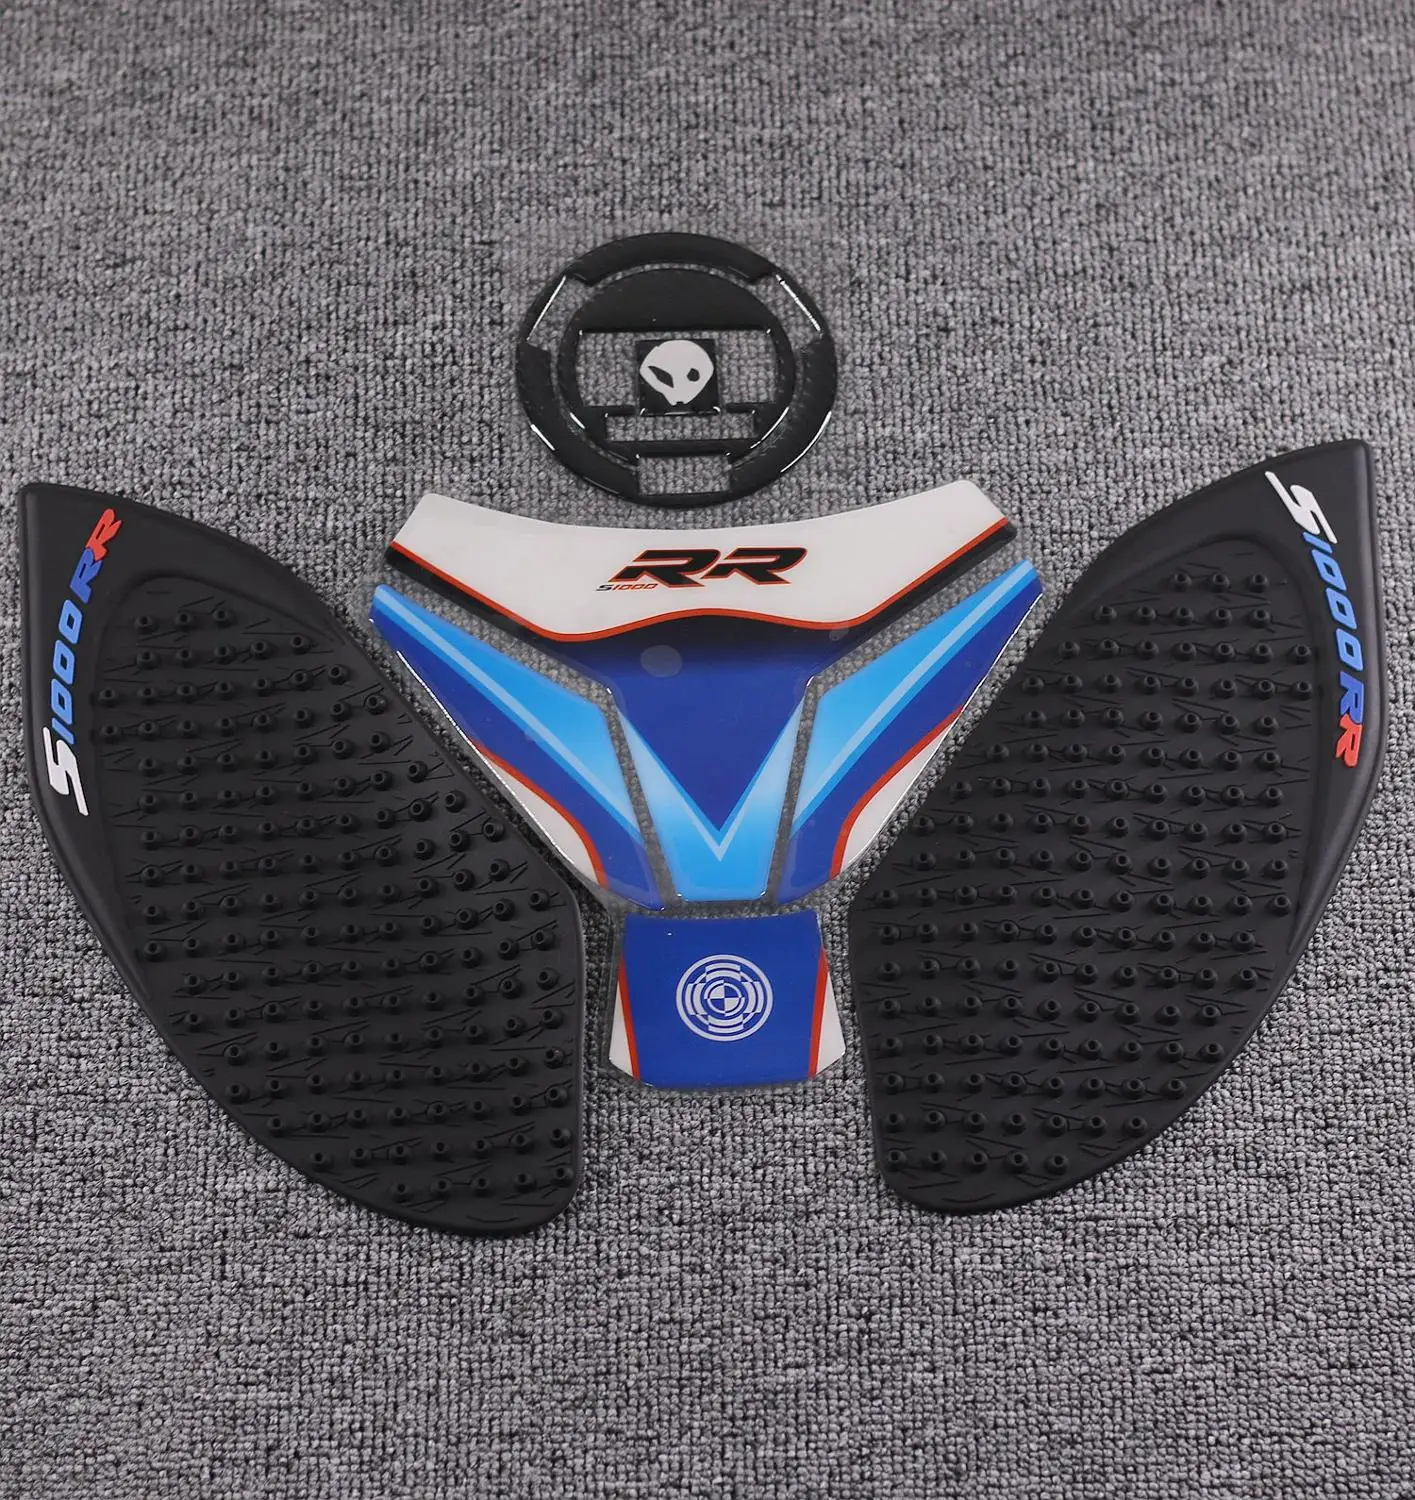 For BMW S1000RR S1000 RR HP4 Tank Cover Protector Motorcycle Carbon Fiber Fuel Tank Cap Sticker Pad Anti Slip Traction Decal